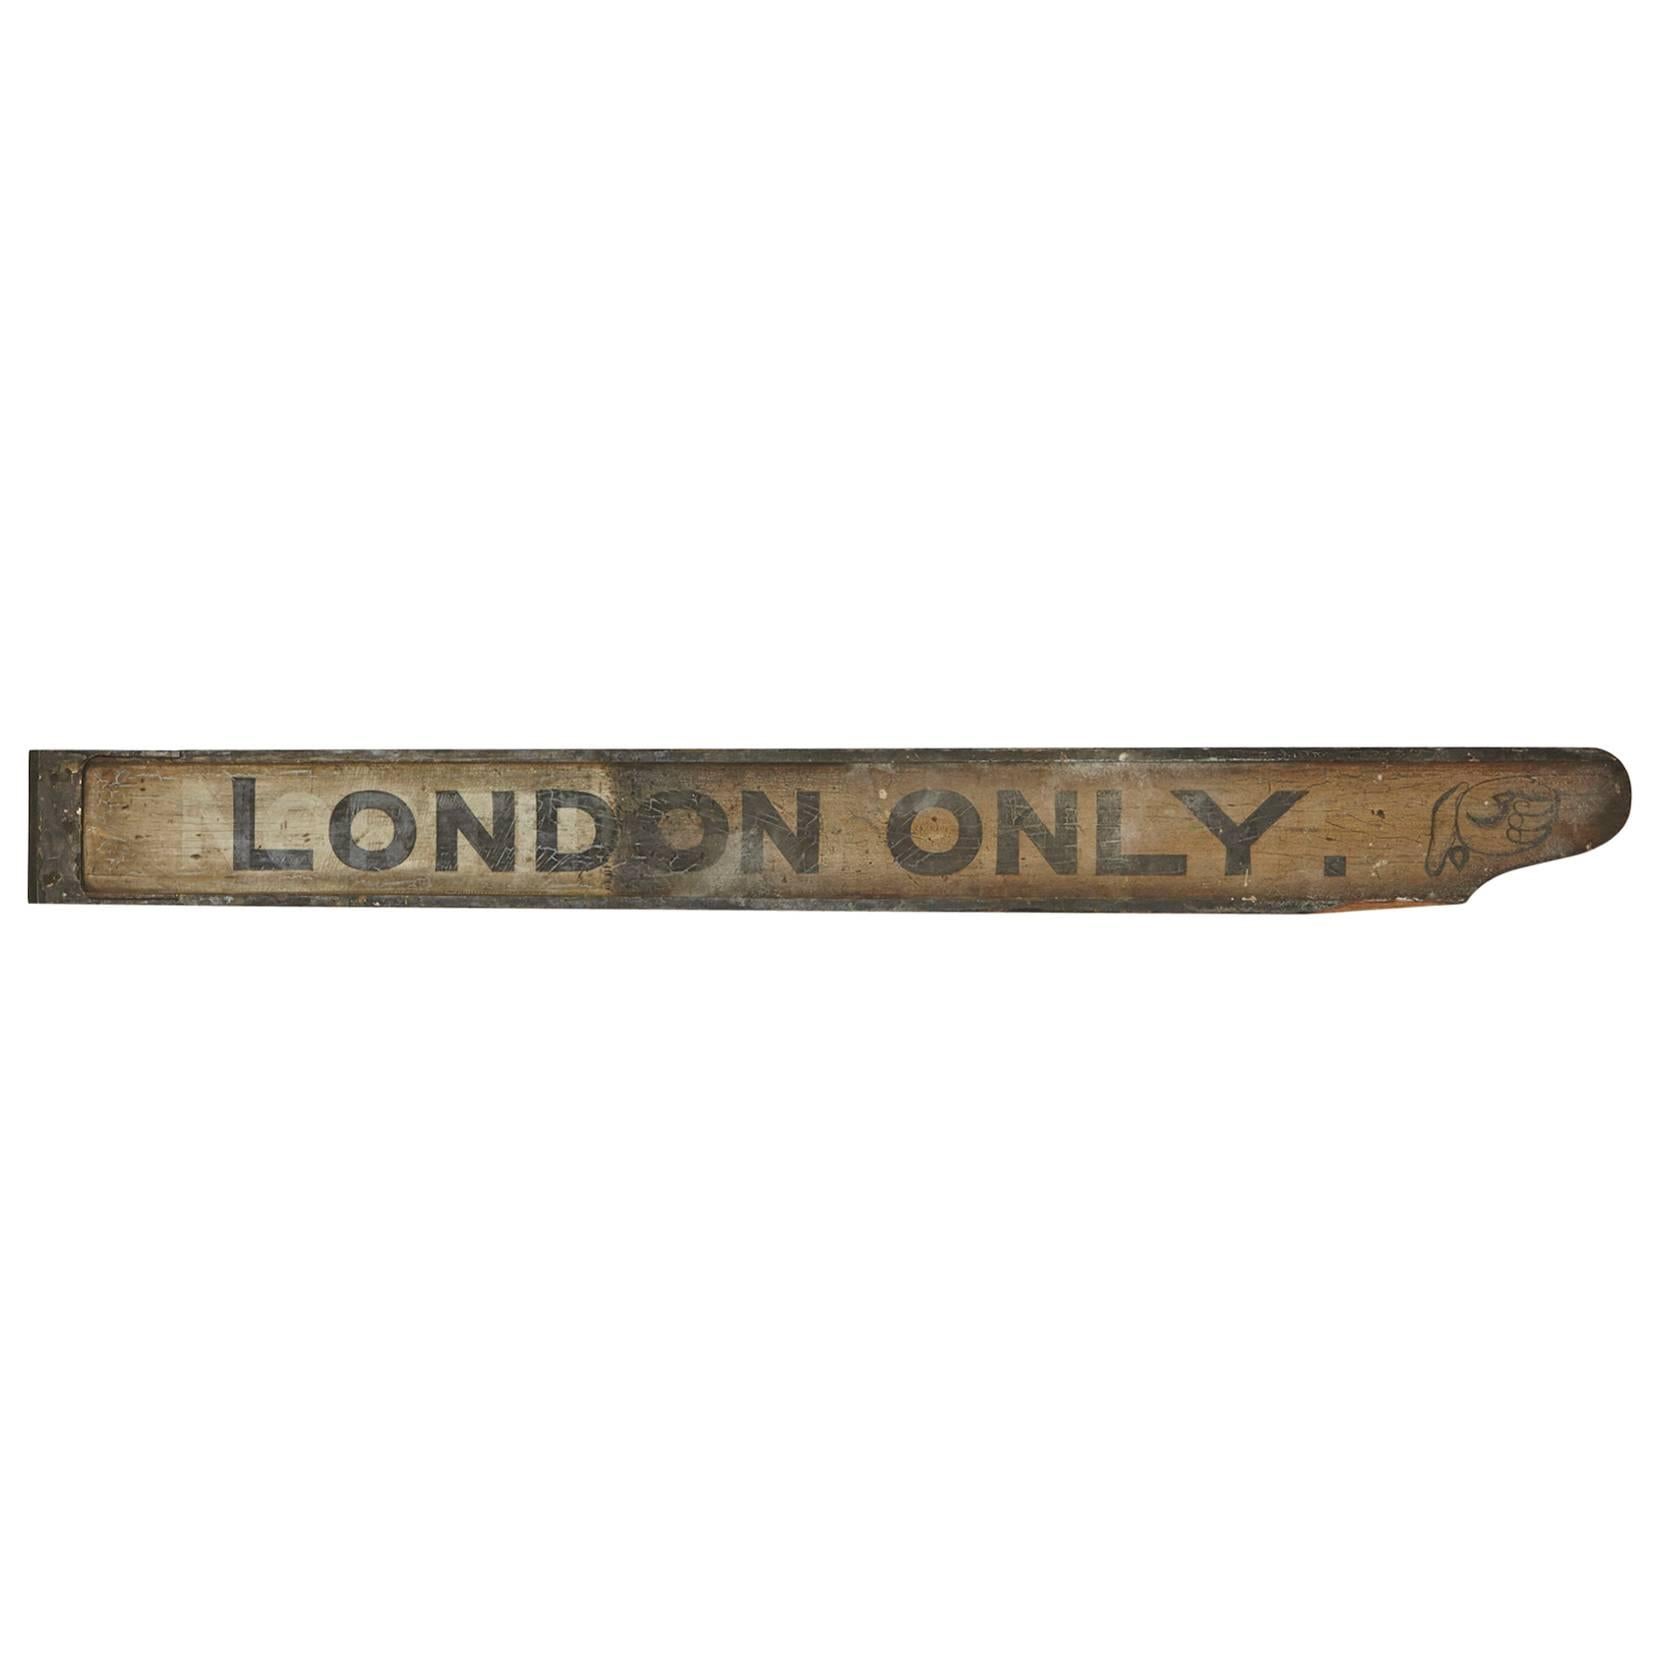 Original Antique Double-Sided Train Station Sign London Only